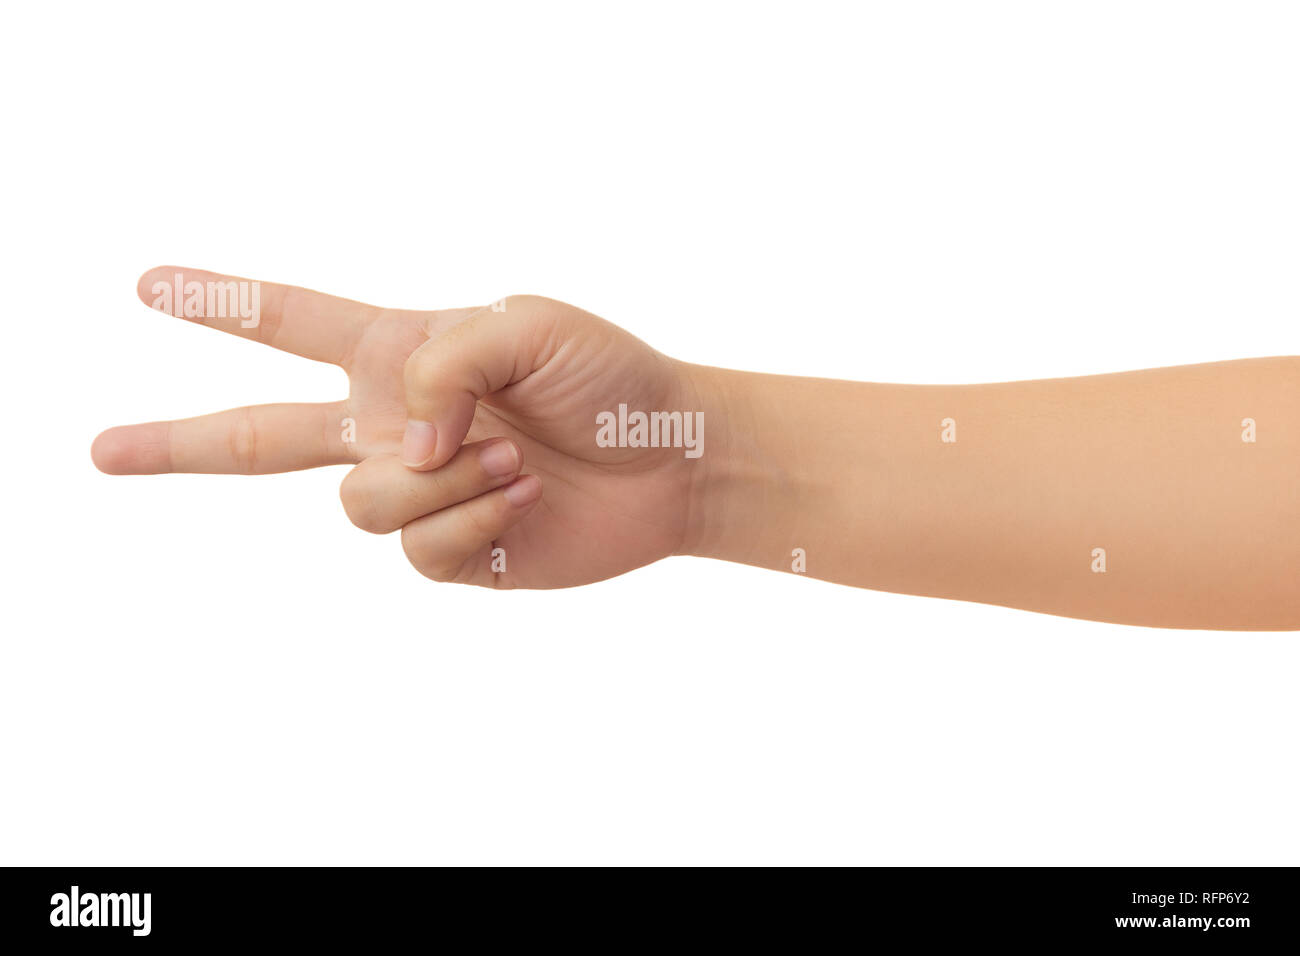 Human hand in reach out one's hand and counting number two sign gesture isolate on white background with clipping path, High resolution and low contra Stock Photo